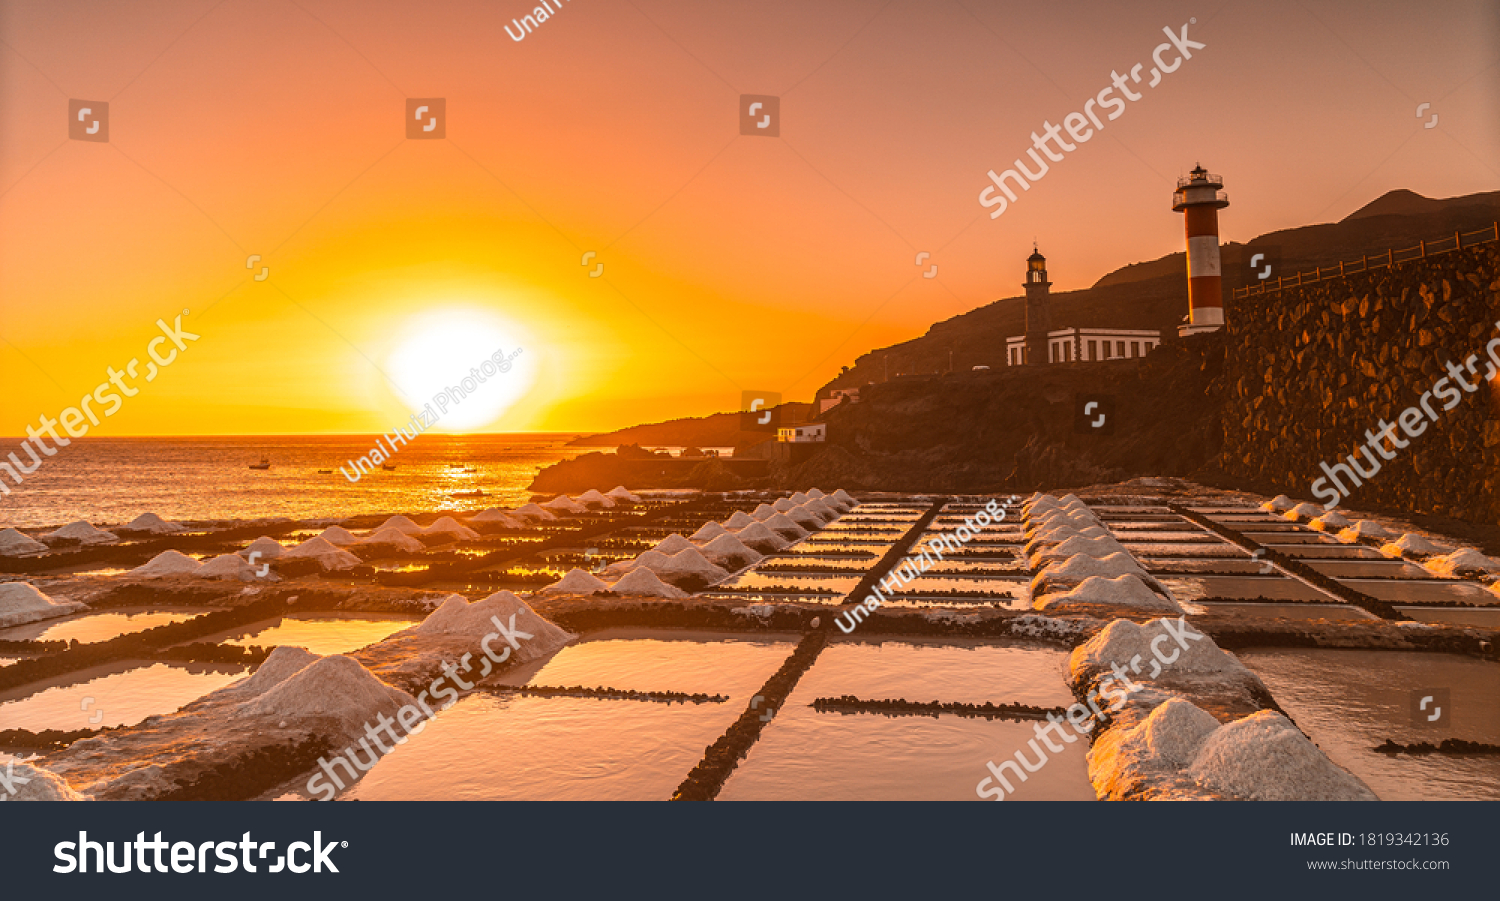 Sunset at the Fuencaliente Lighthouse next to the salt flats, on the route of the volcanoes south of the island of La Palma, Canary Islands, Spain #1819342136